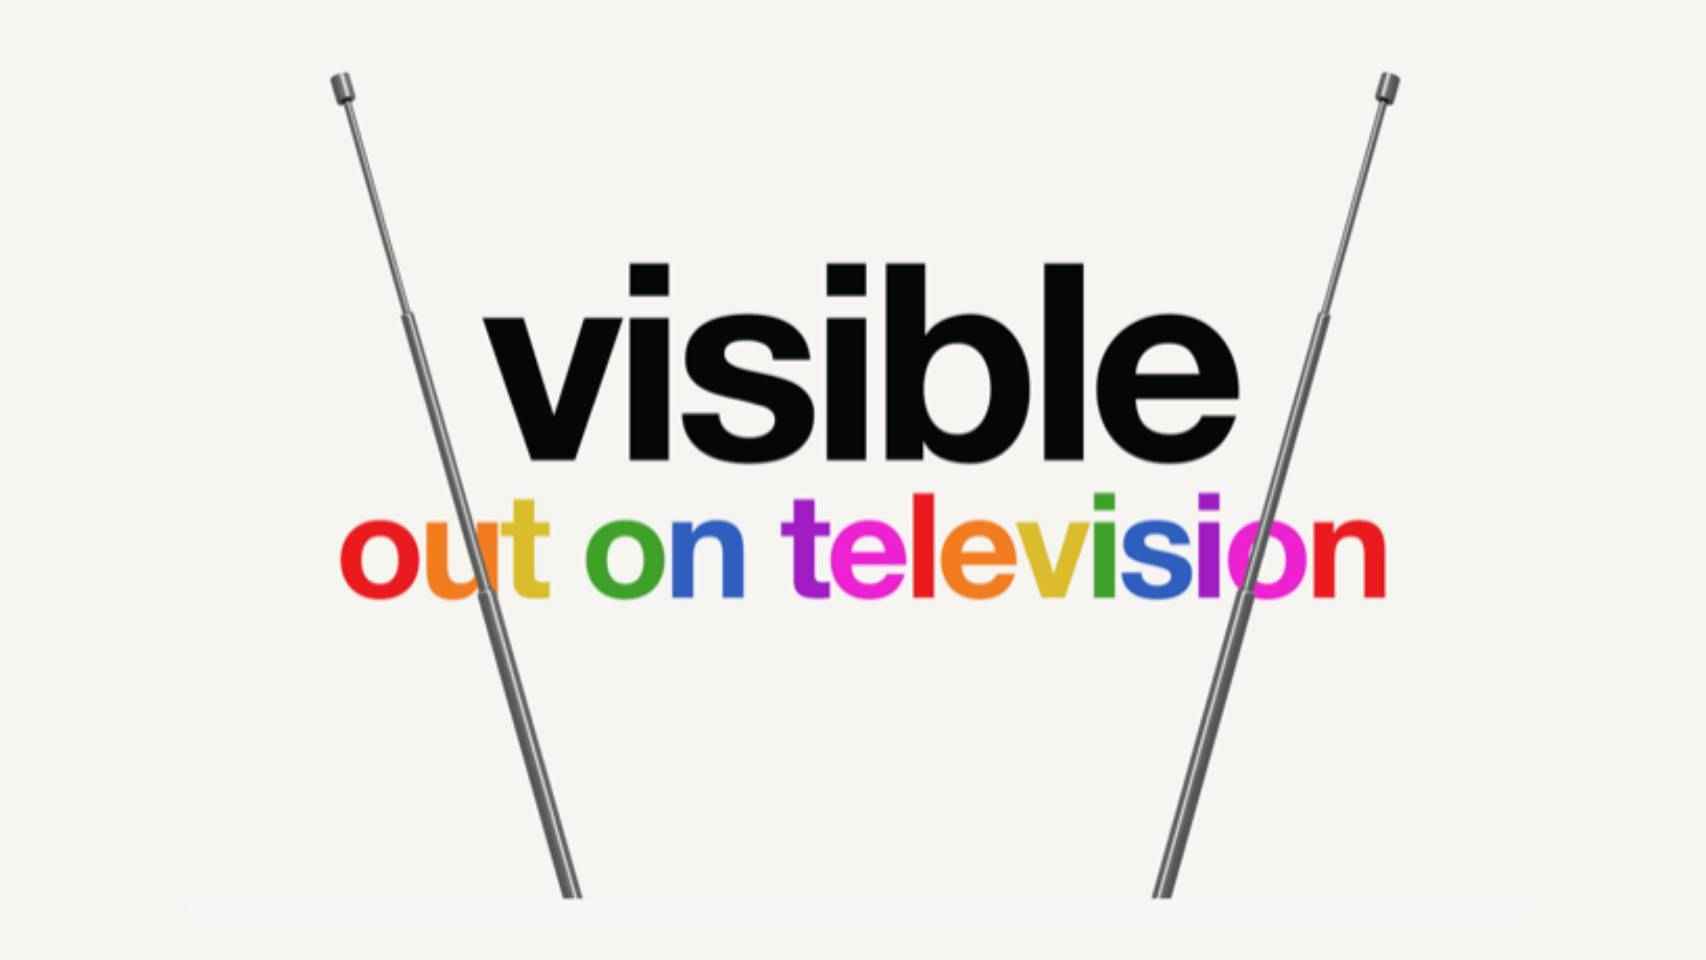 Visible out on television